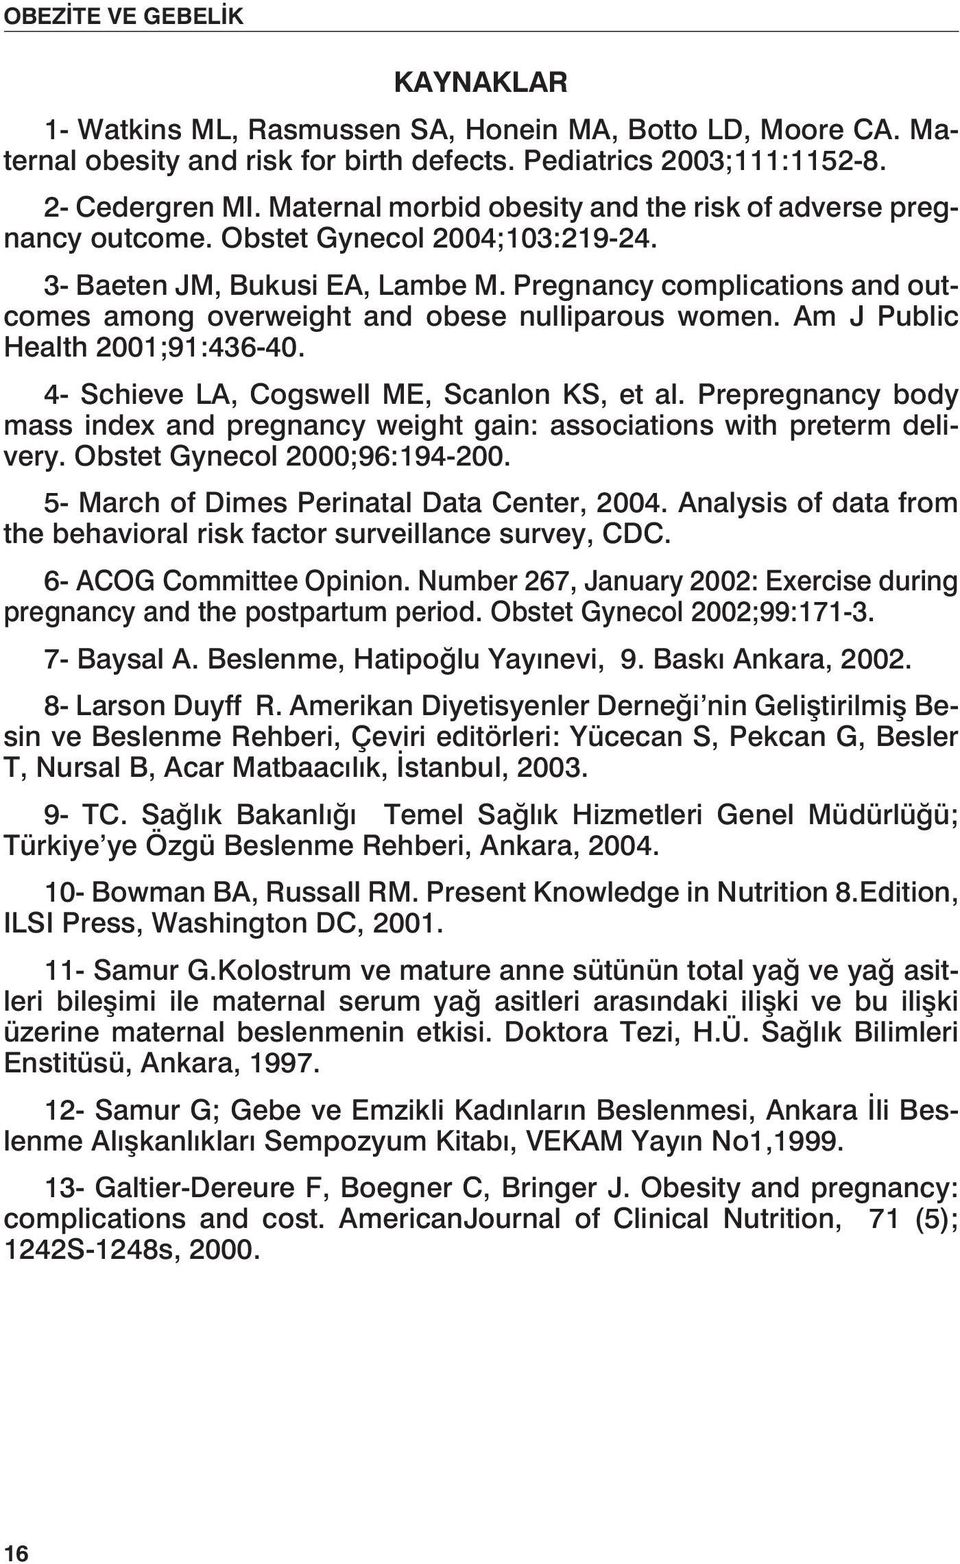 Pregnancy complications and outcomes among overweight and obese nulliparous women. Am J Public Health 2001;91:436-40. 4- Schieve LA, Cogswell ME, Scanlon KS, et al.